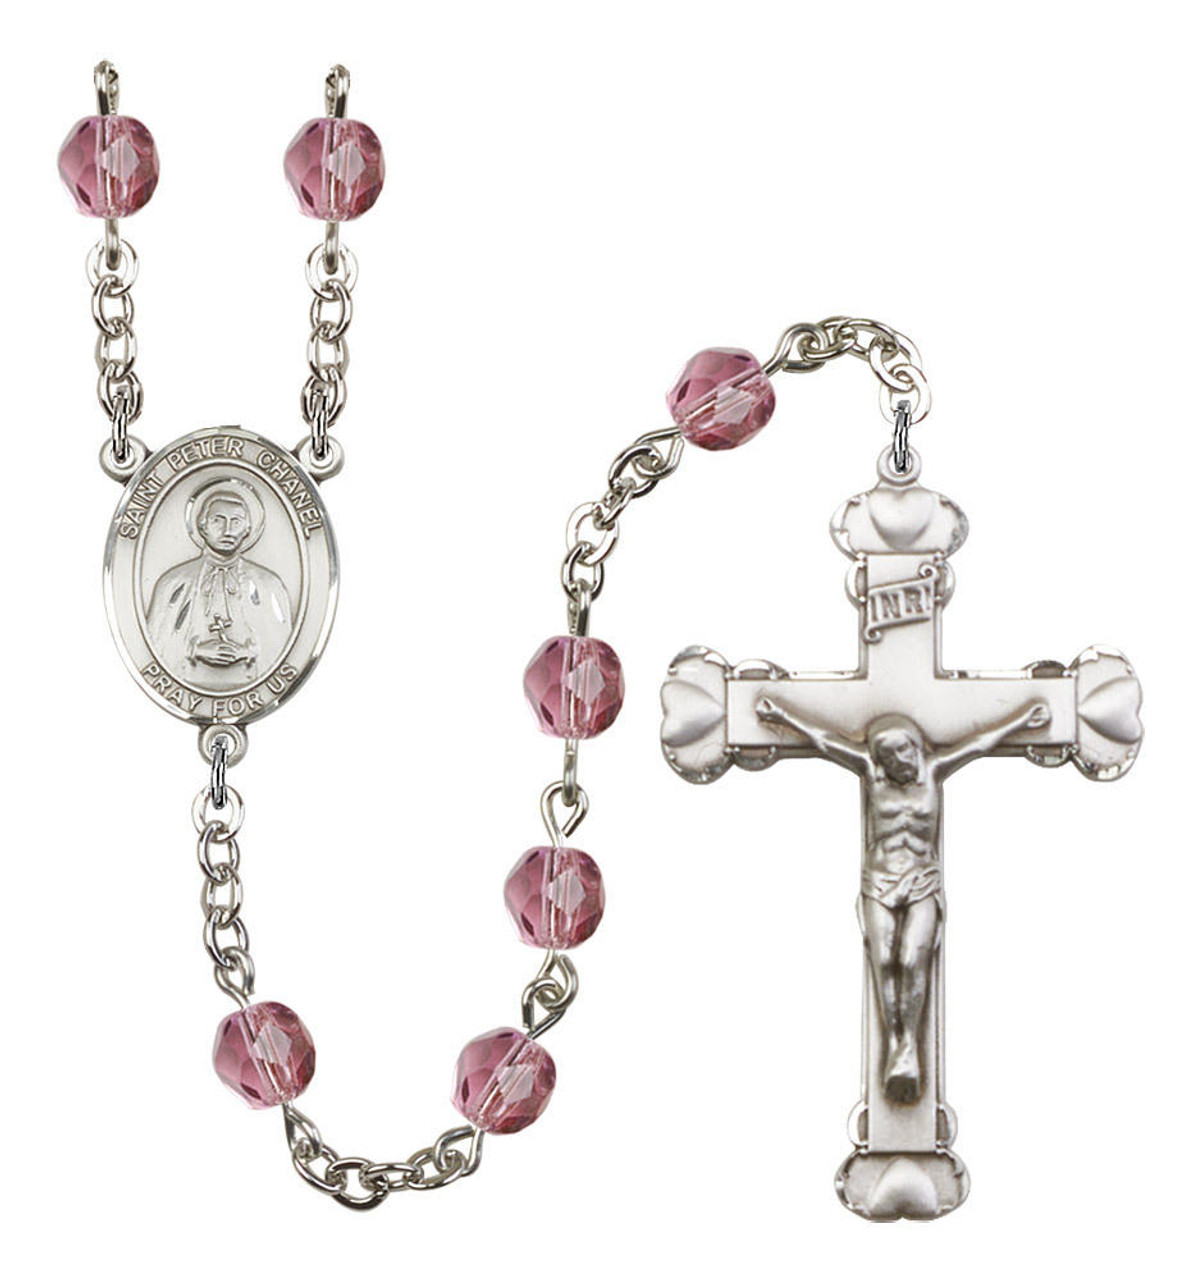 St. Peter Chanel Rosary - 6MM Fire Polished Beads (8397SS)